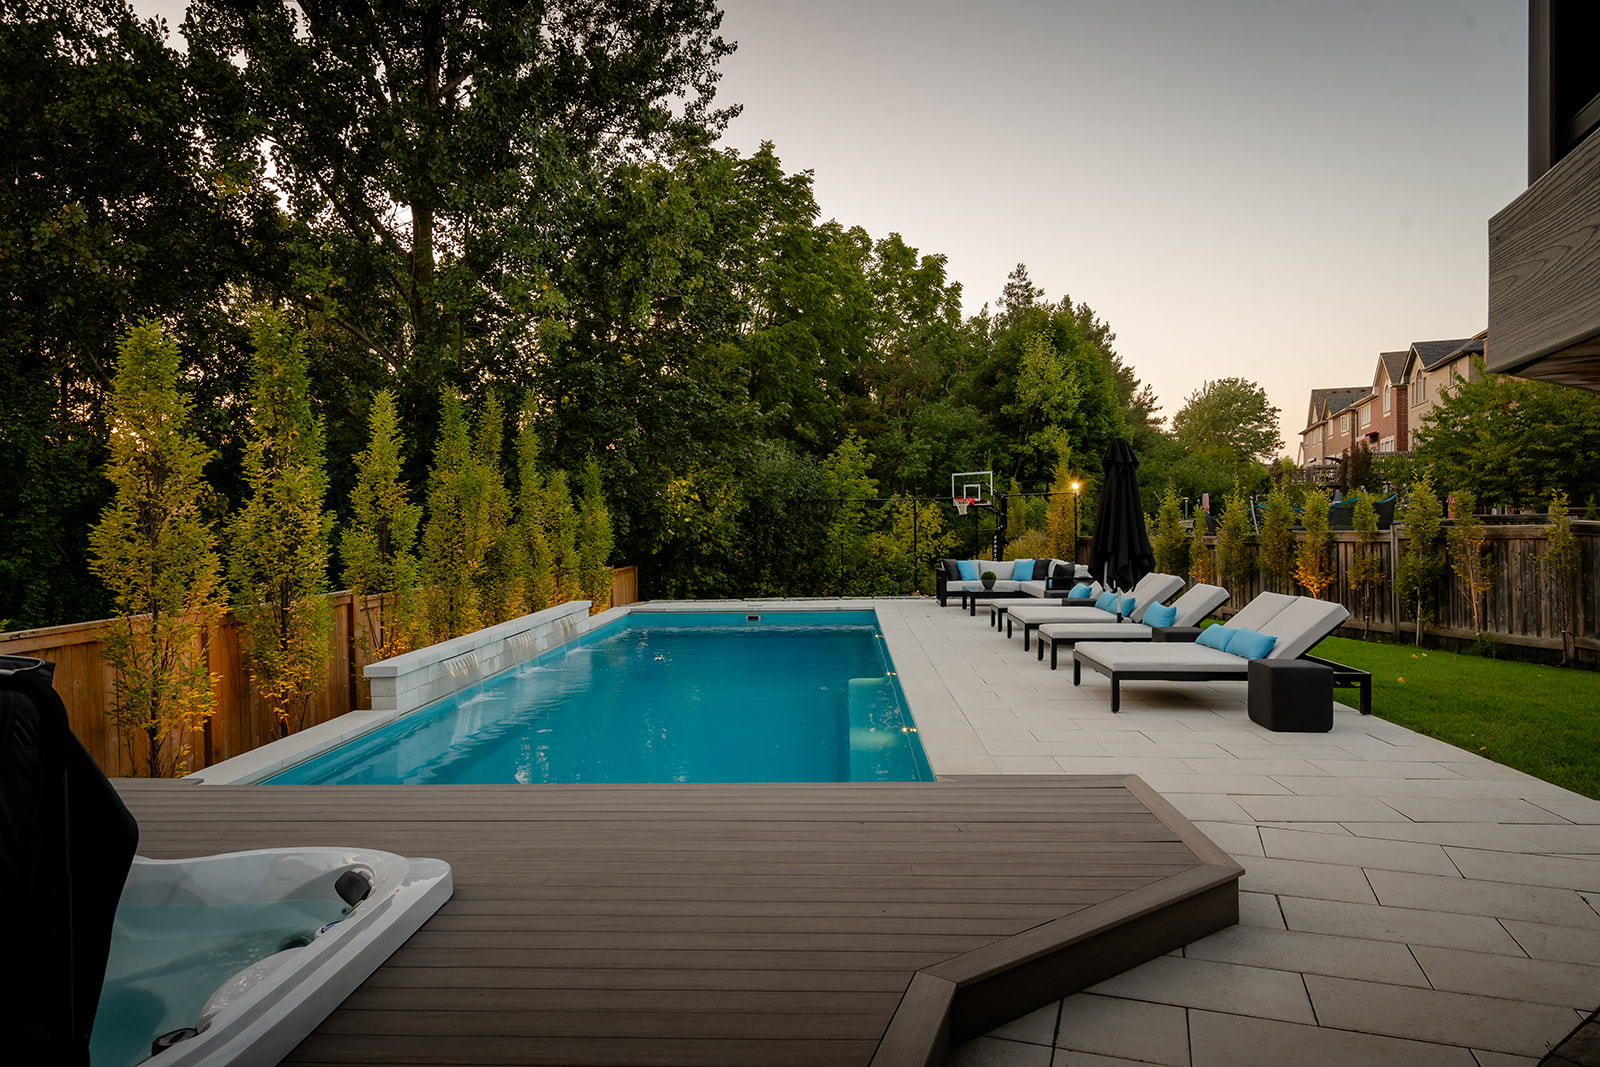 An inground pool in the backyard with the raised deck in the foreground.